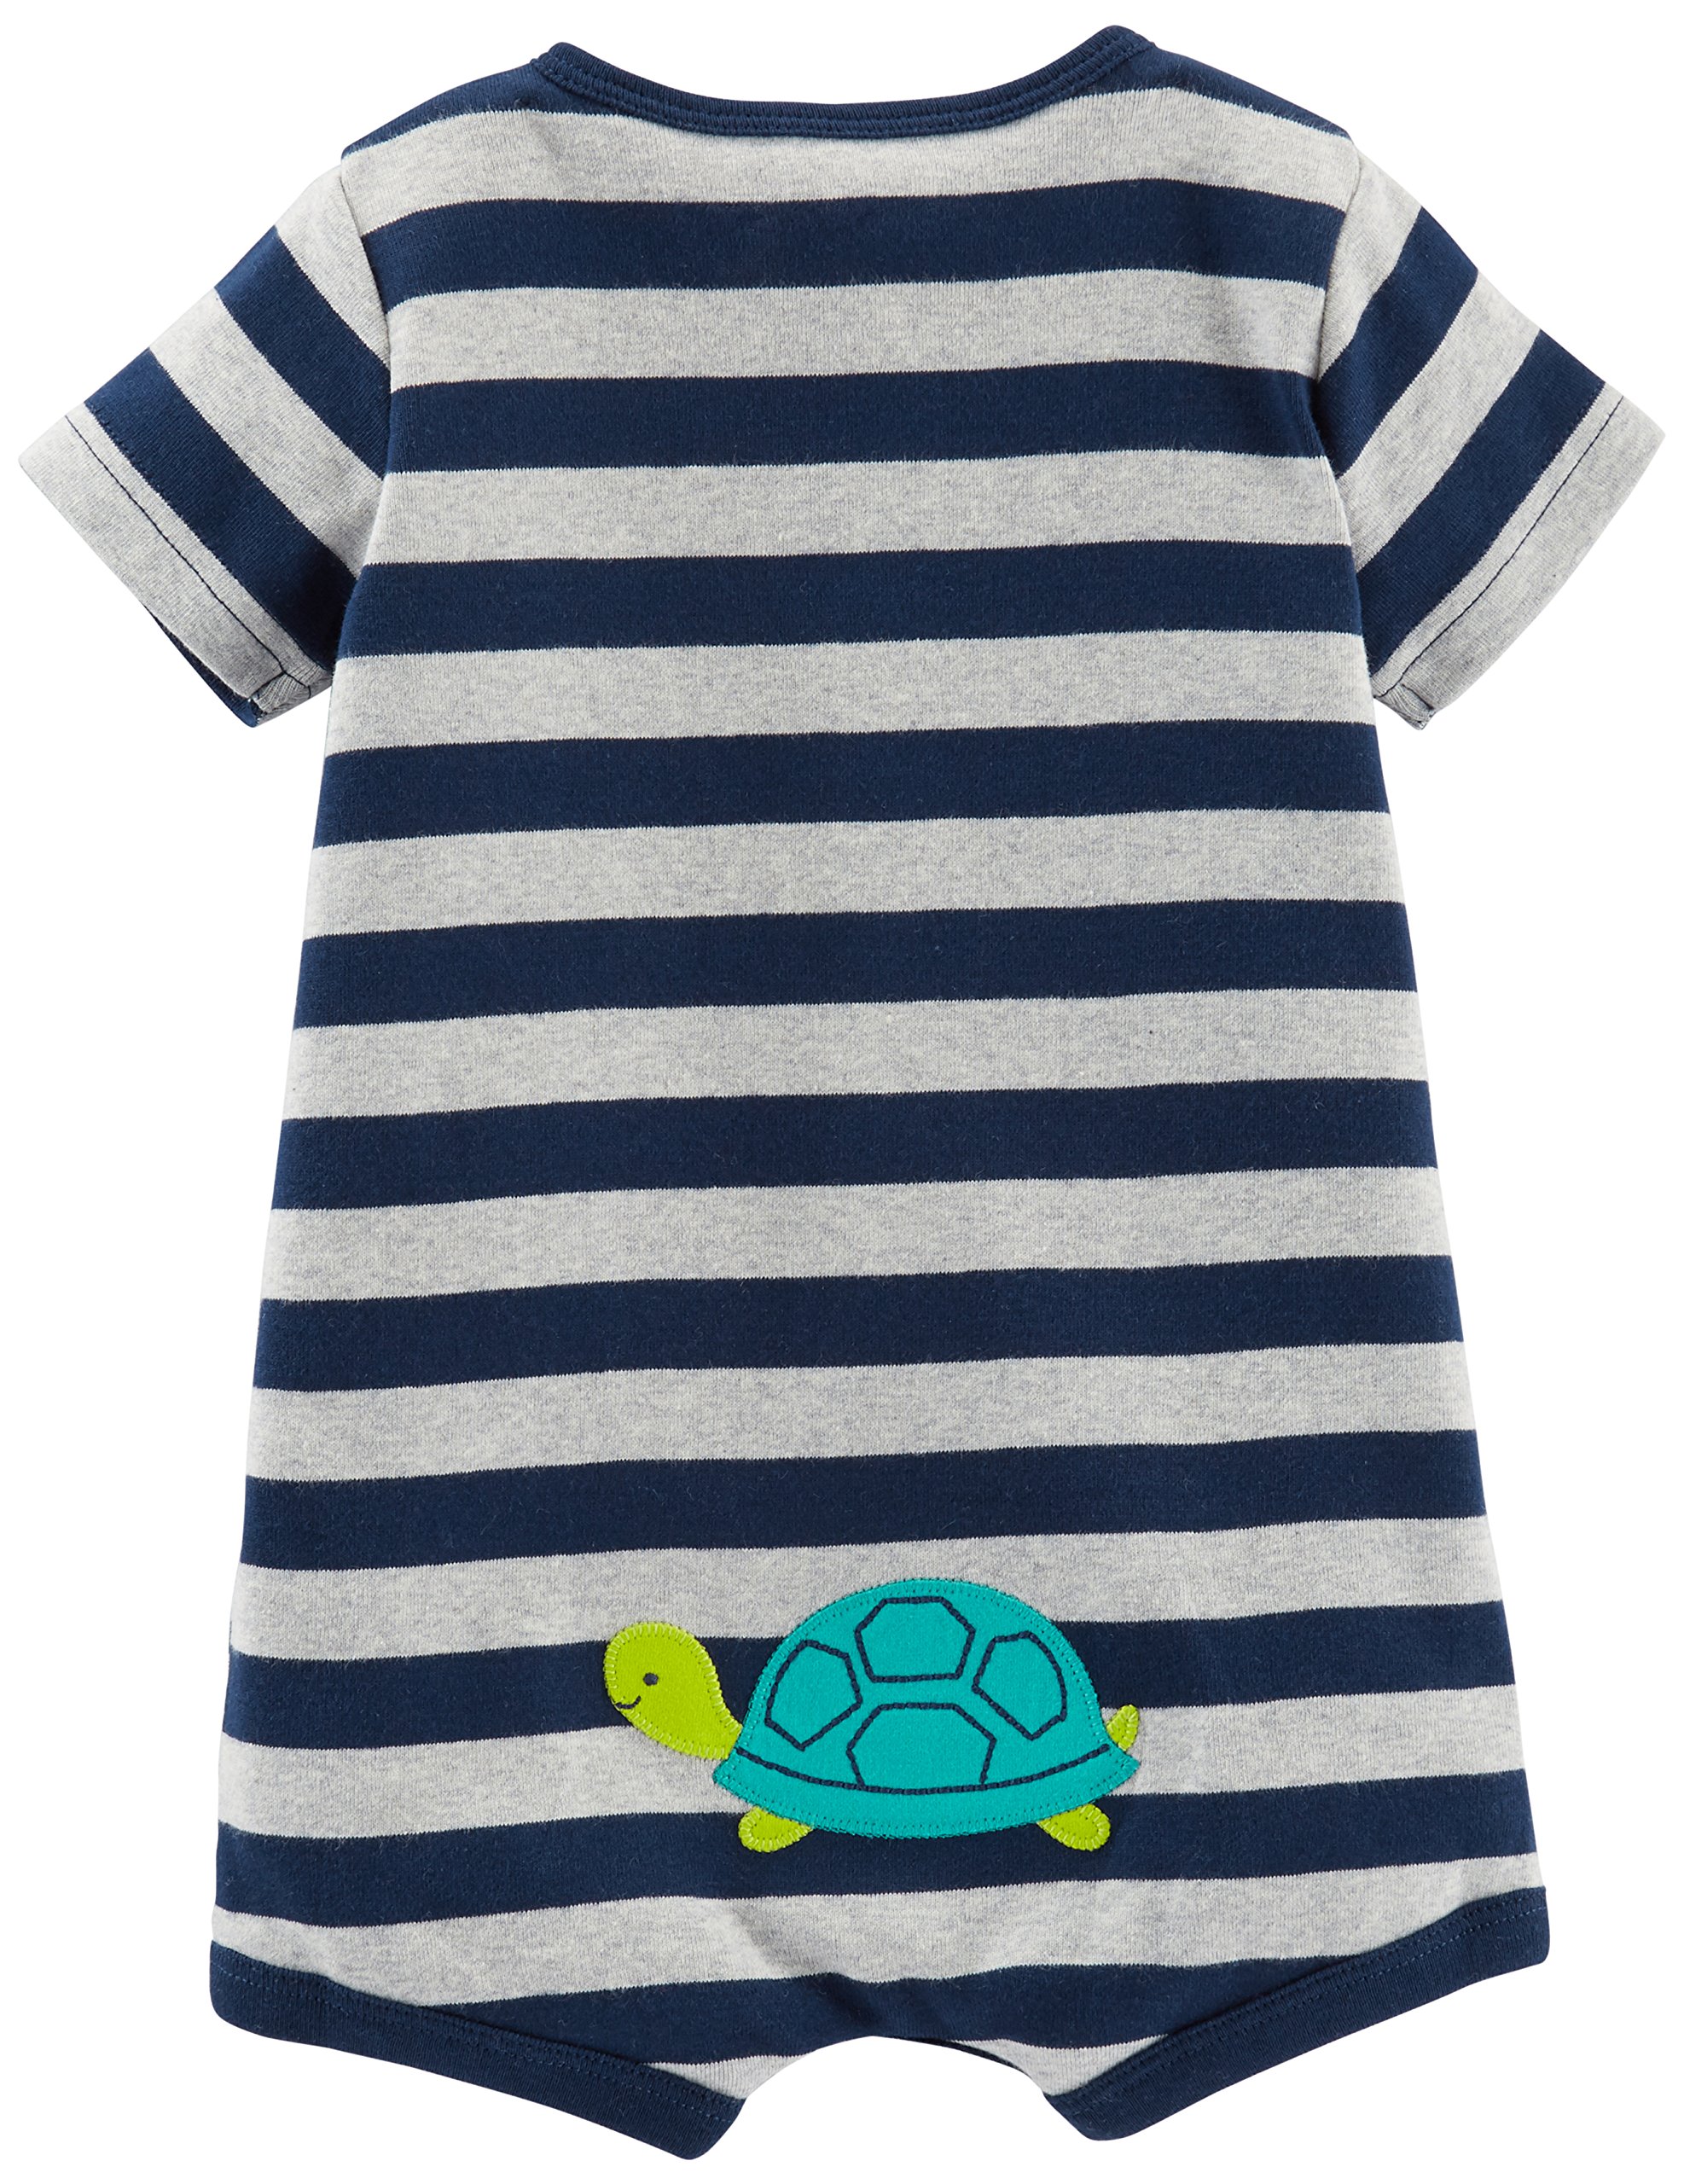 Simple Joys by Carter's Baby Boys' Snap-Up Rompers, Pack of 3